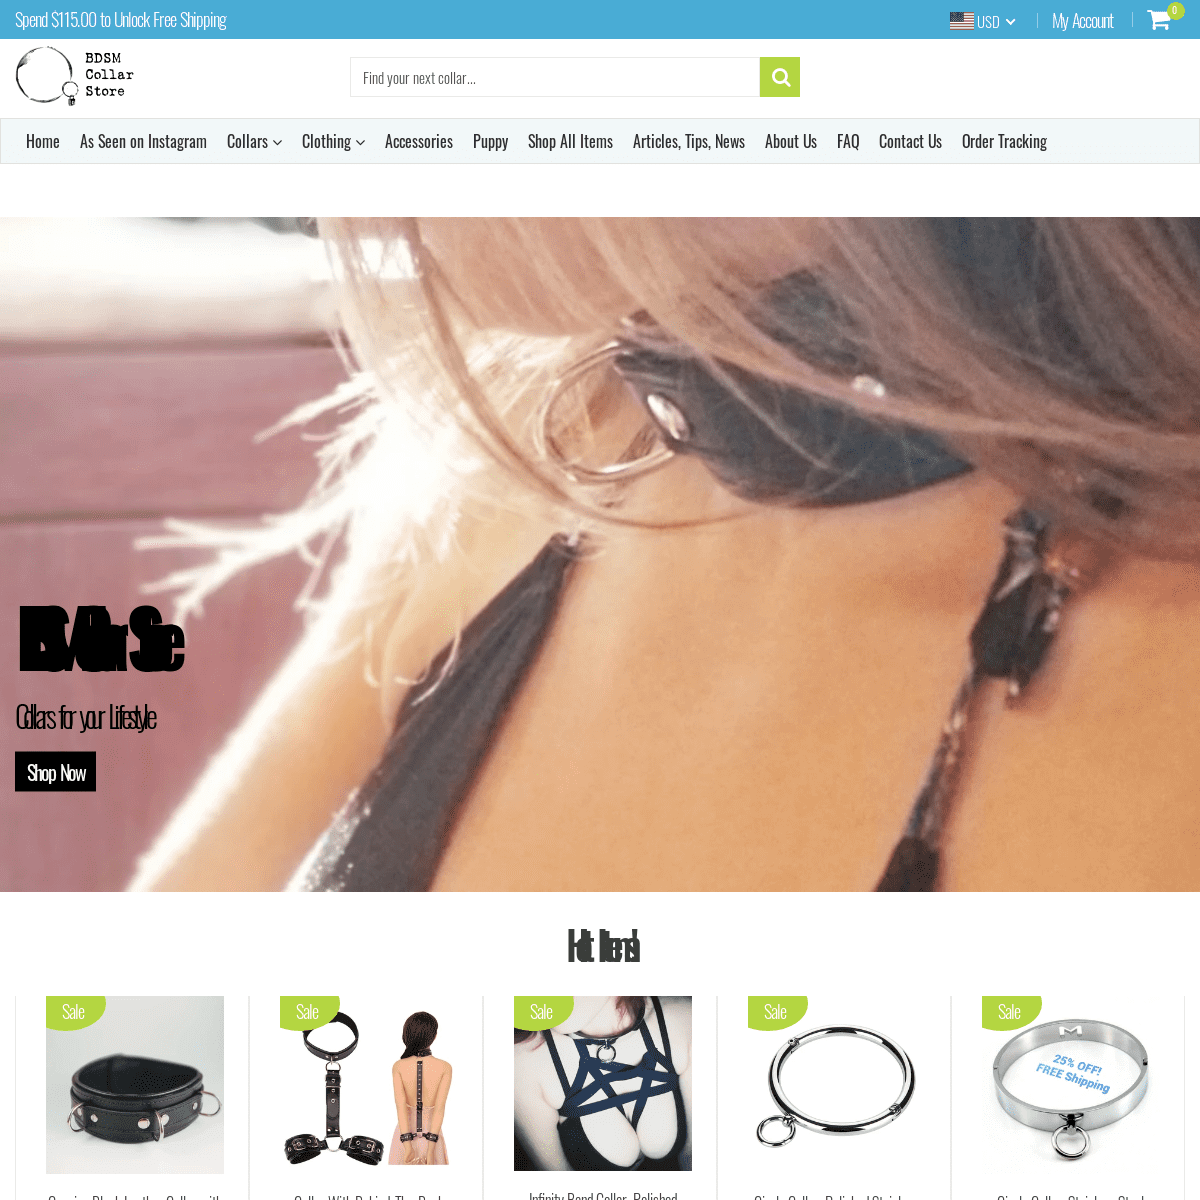 A complete backup of bdsmcollarstore.com